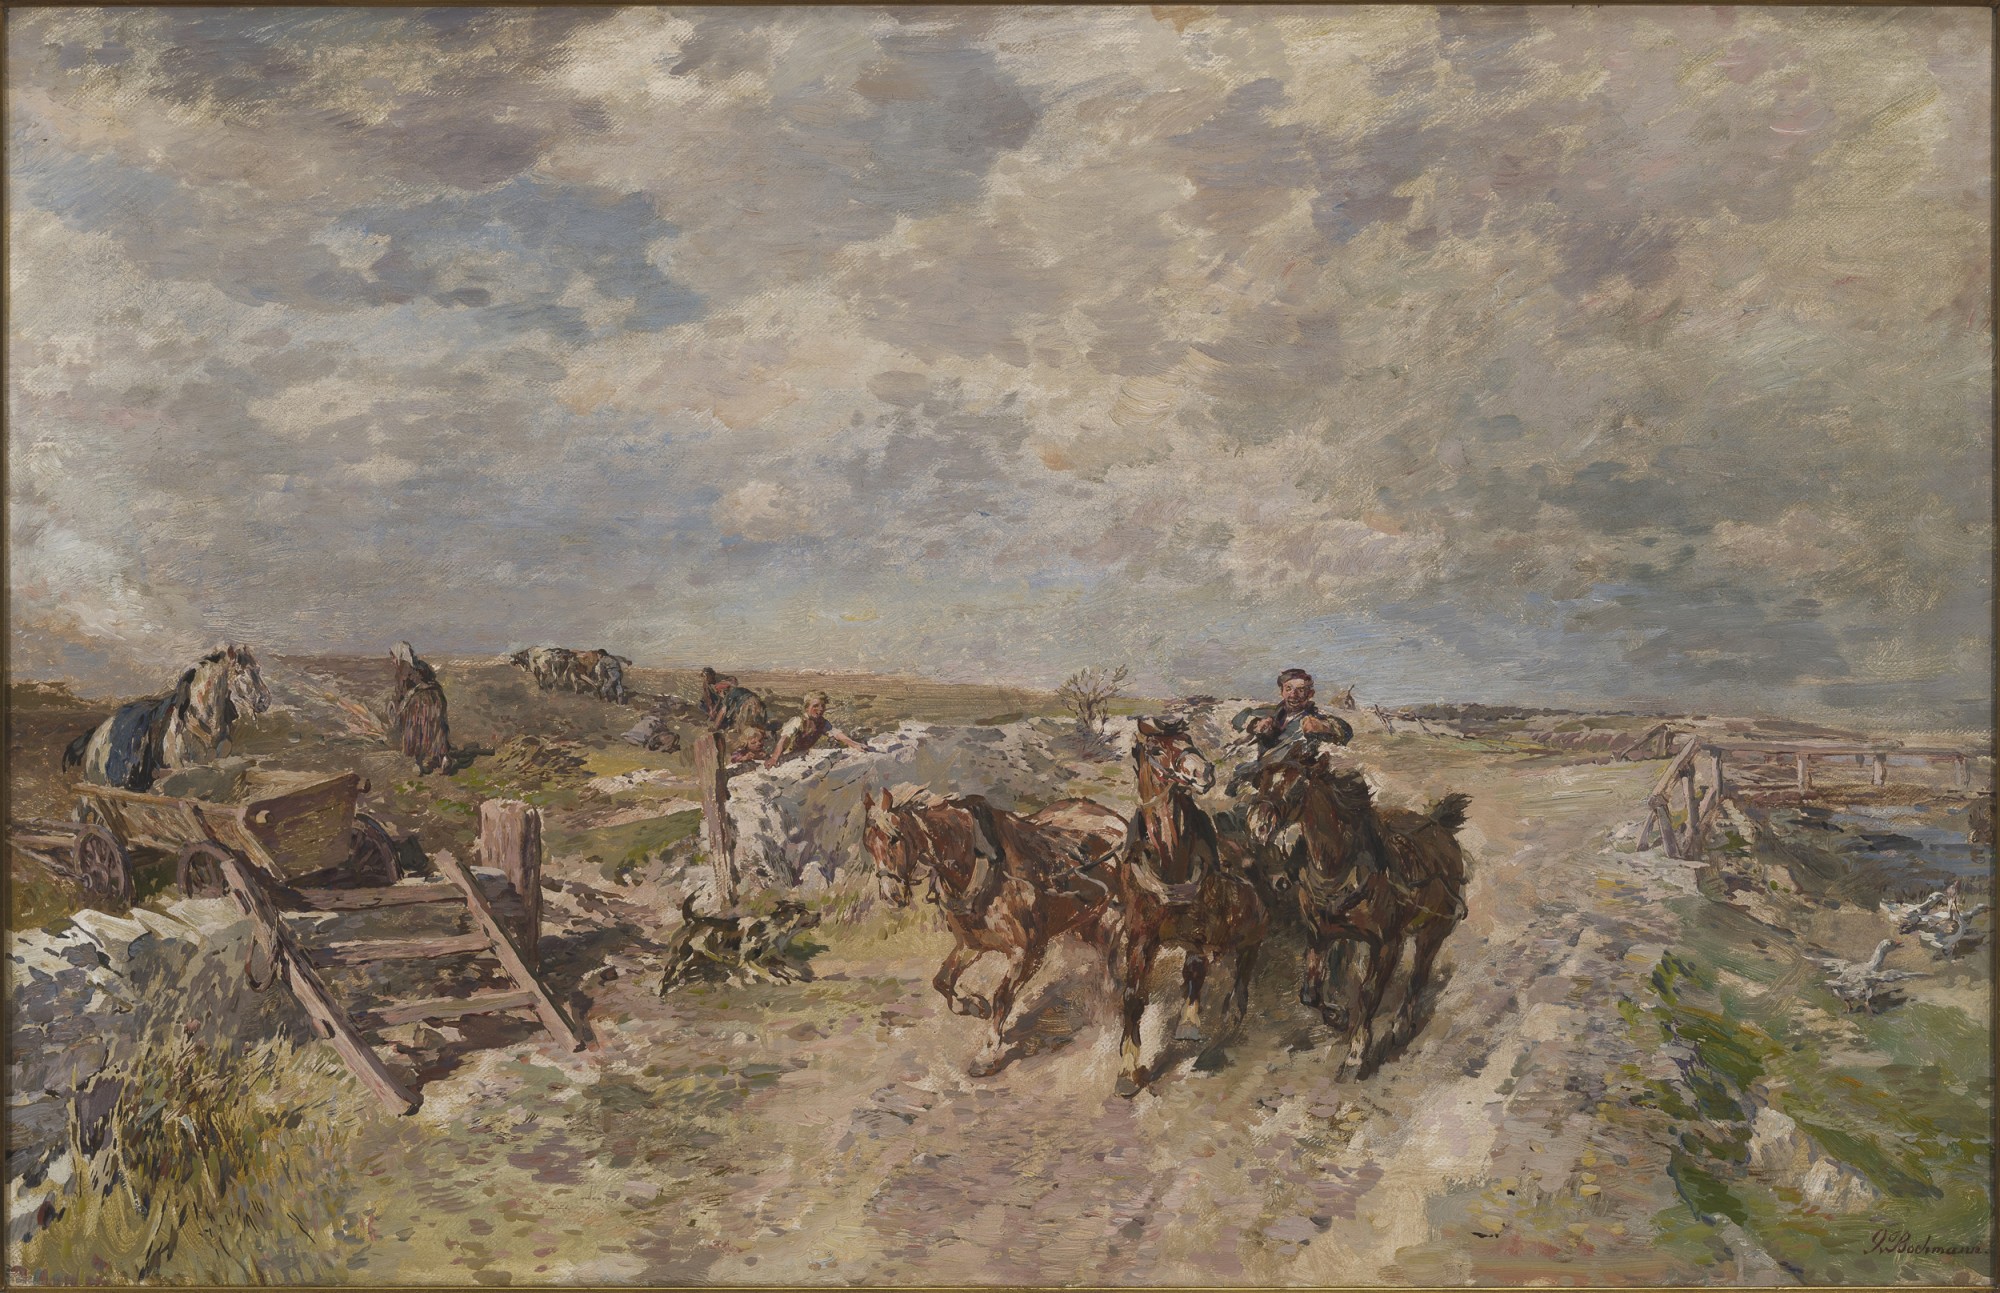 Gregor von Bochmann "On the Road With Horses"